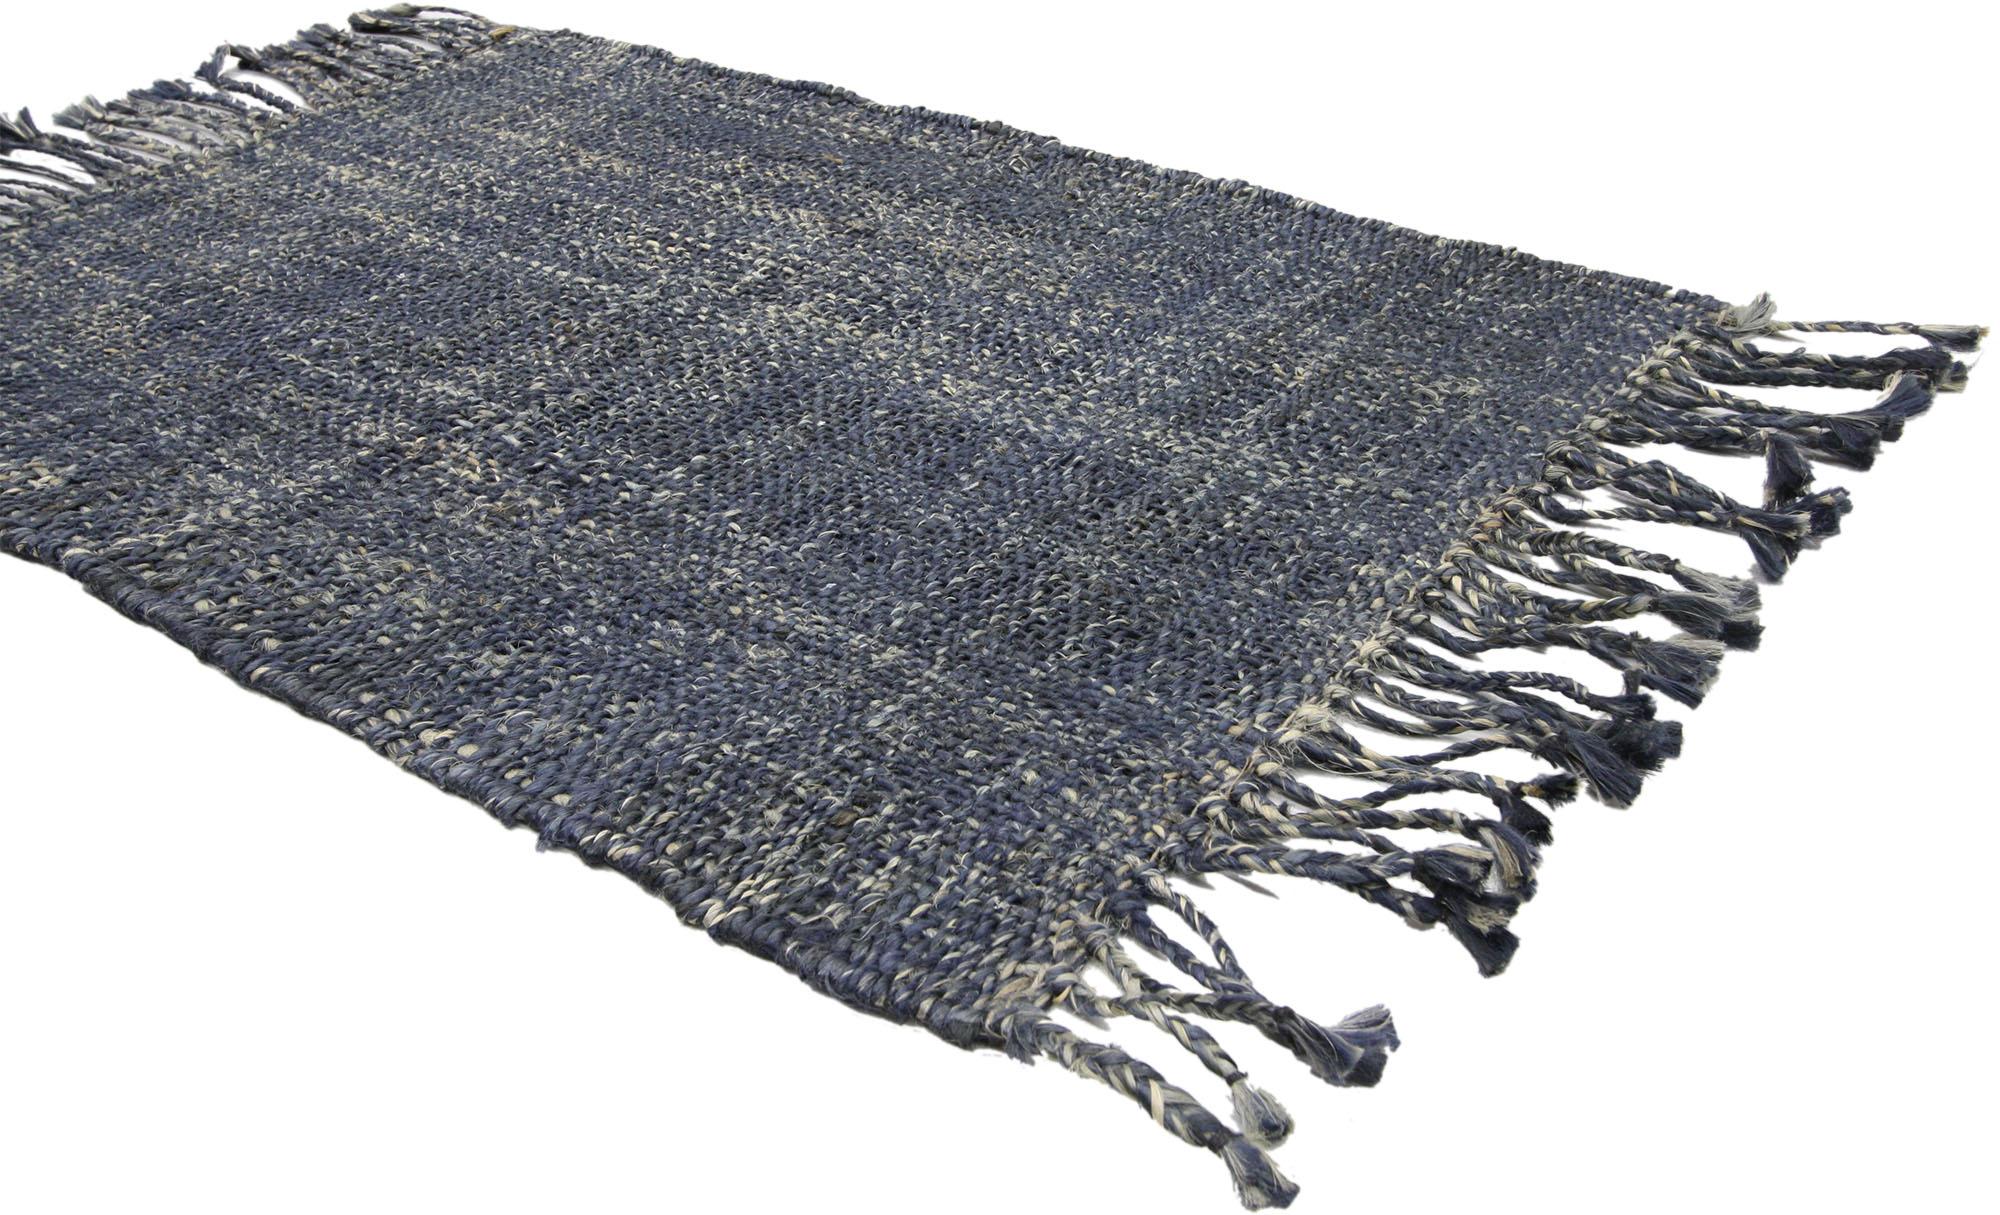 30379 Modern Indian Dhurrie Rug, 02'03 x 03'01. Subtle in style and very versatile, this handwoven modern Dhurrie rug features softly gradated striations running selvage to selvage blending seamlessly from one to the next. The overall design